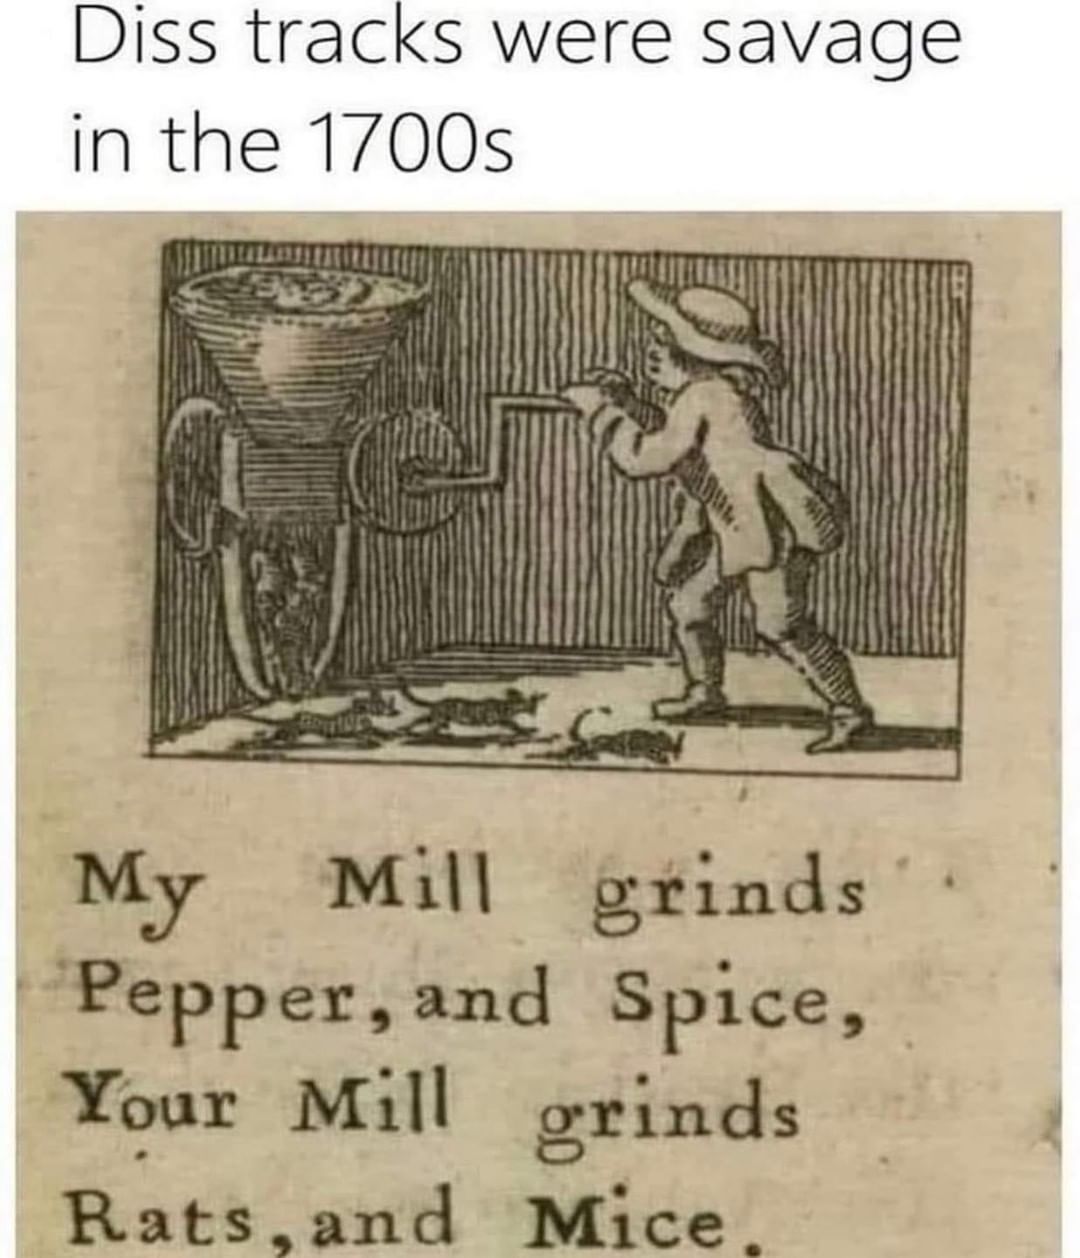 Diss tracks were savage in the 1700s.  My mill grinds pepper, and spice, your mill grinds ratas, and mice.